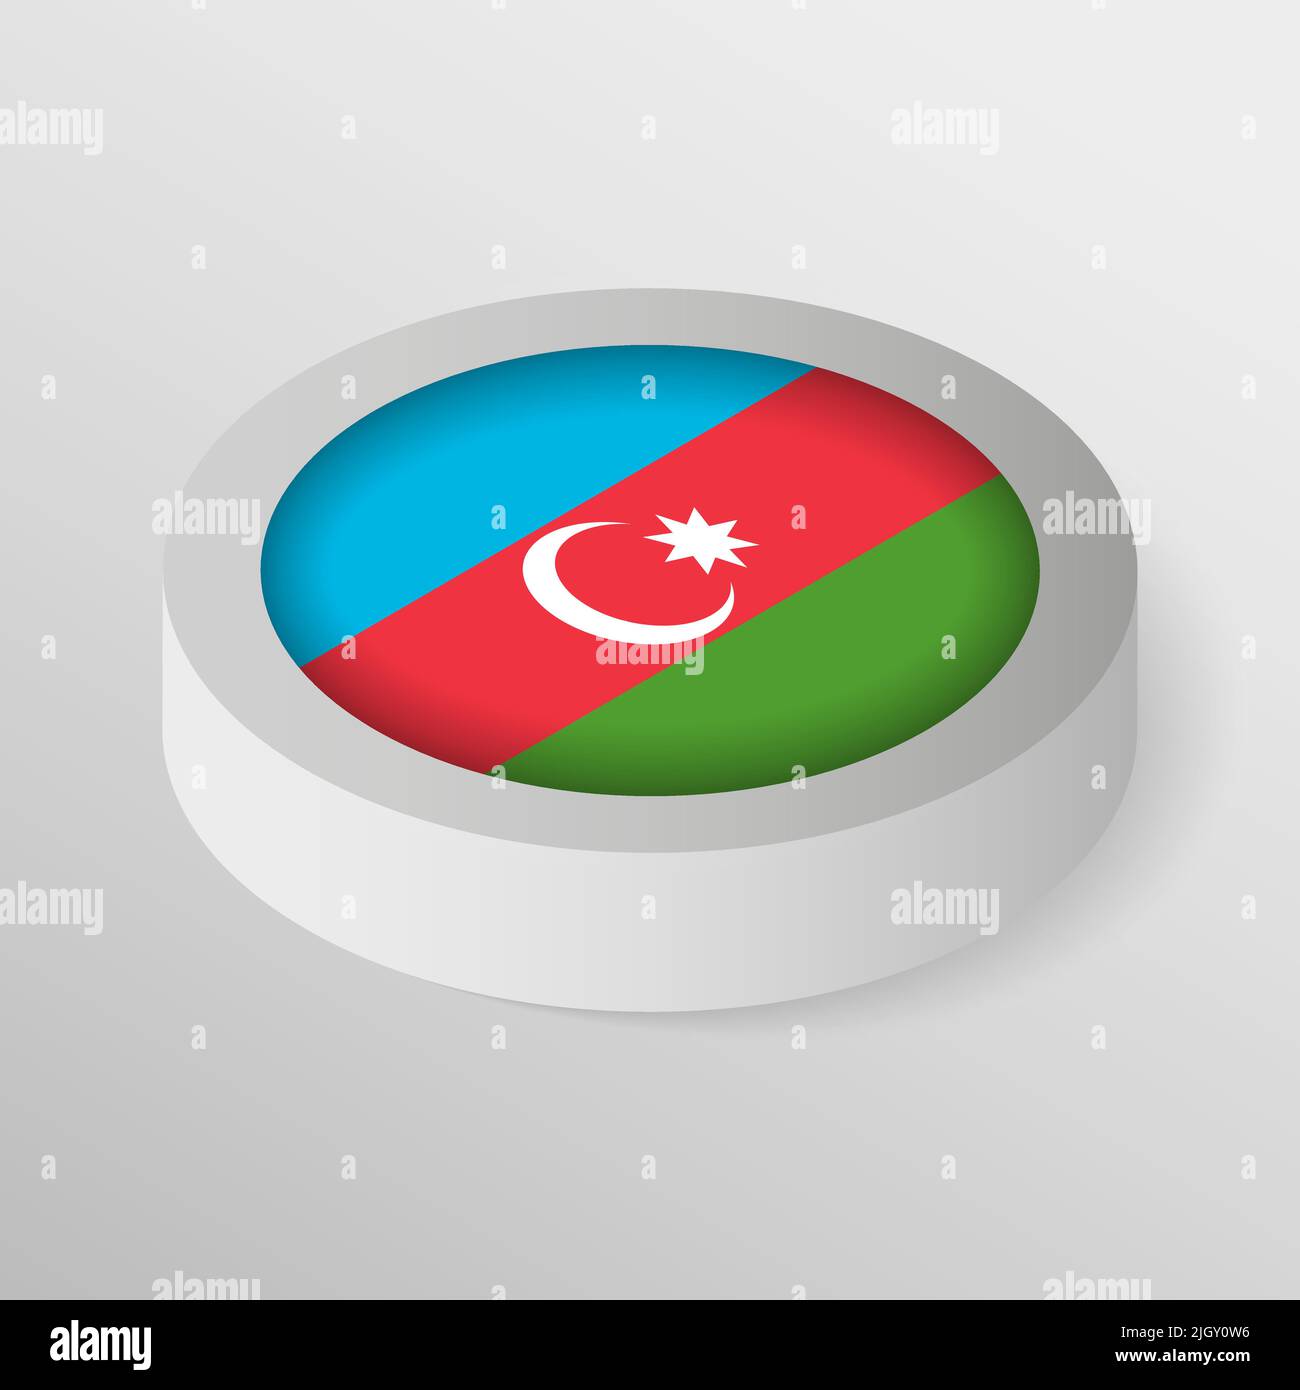 EPS10 Vector Patriotic shield with flag of Azerbaijan. An element of impact for the use you want to make of it. Stock Vector